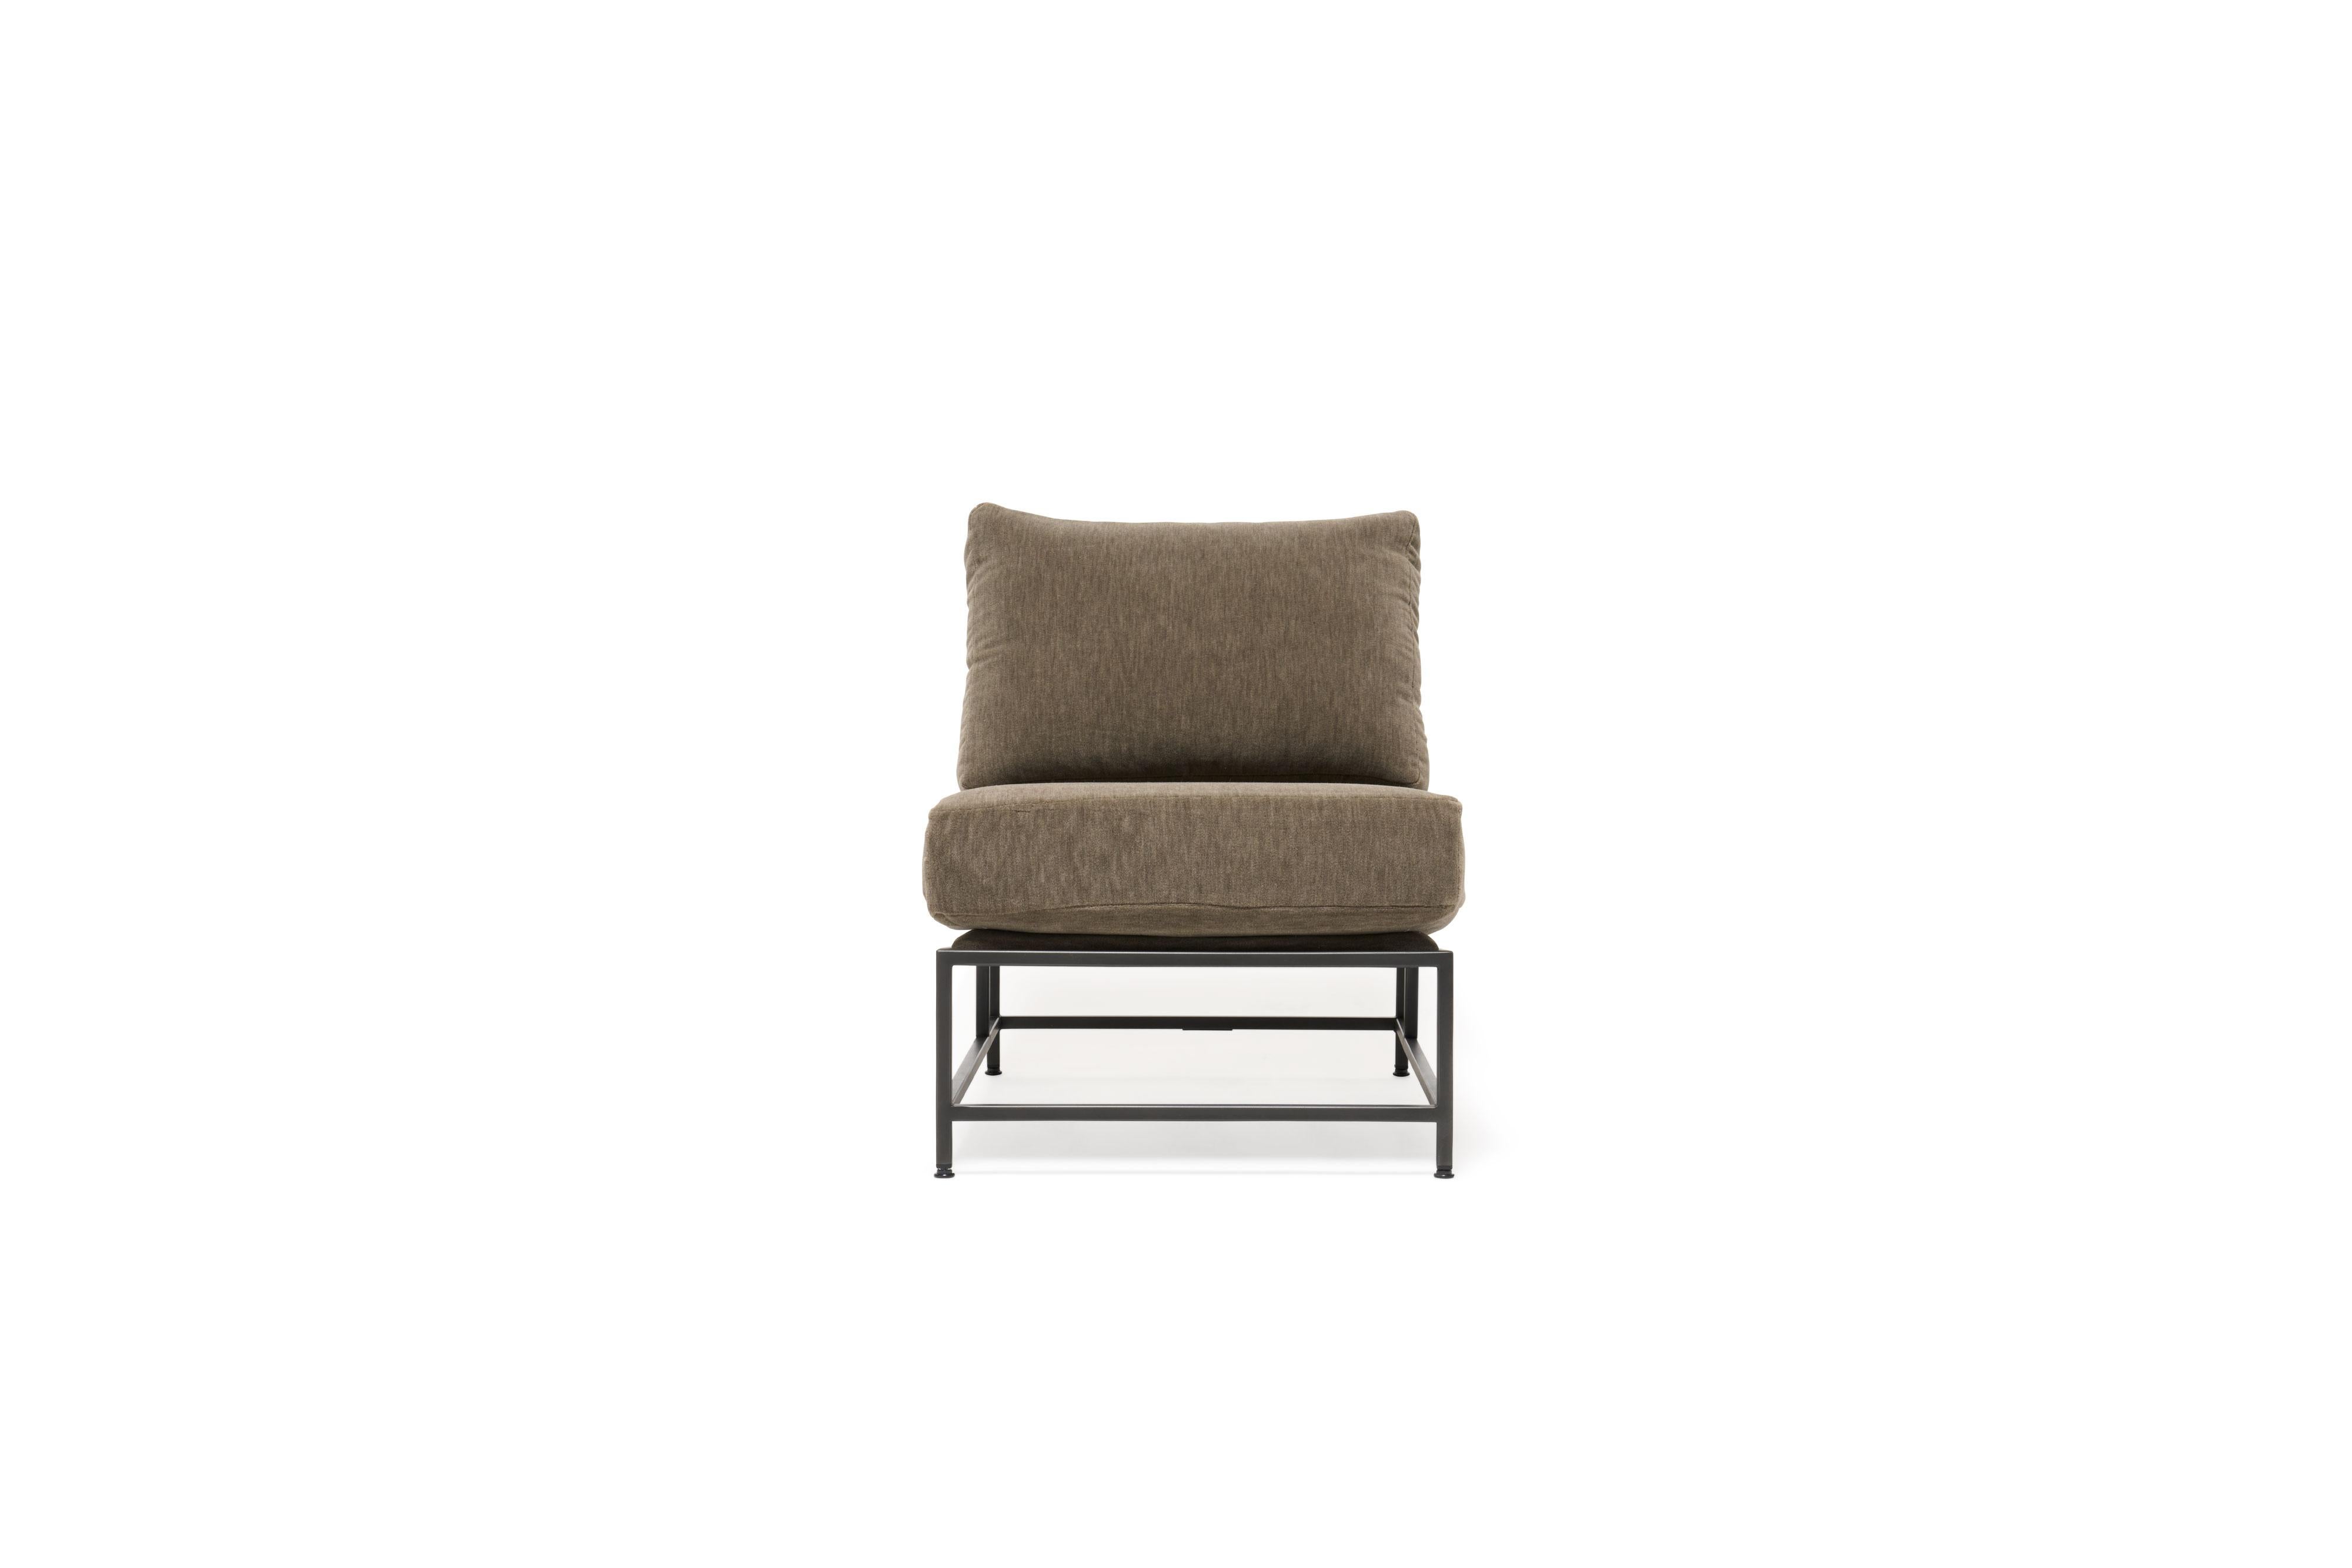 The Inheritance Chair by Stephen Kenn is as comfortable as it is unique. The design features an exposed construction composed of three elements - a steel frame, plush upholstery, and supportive belts. The deep seating area is perfect for a relaxing